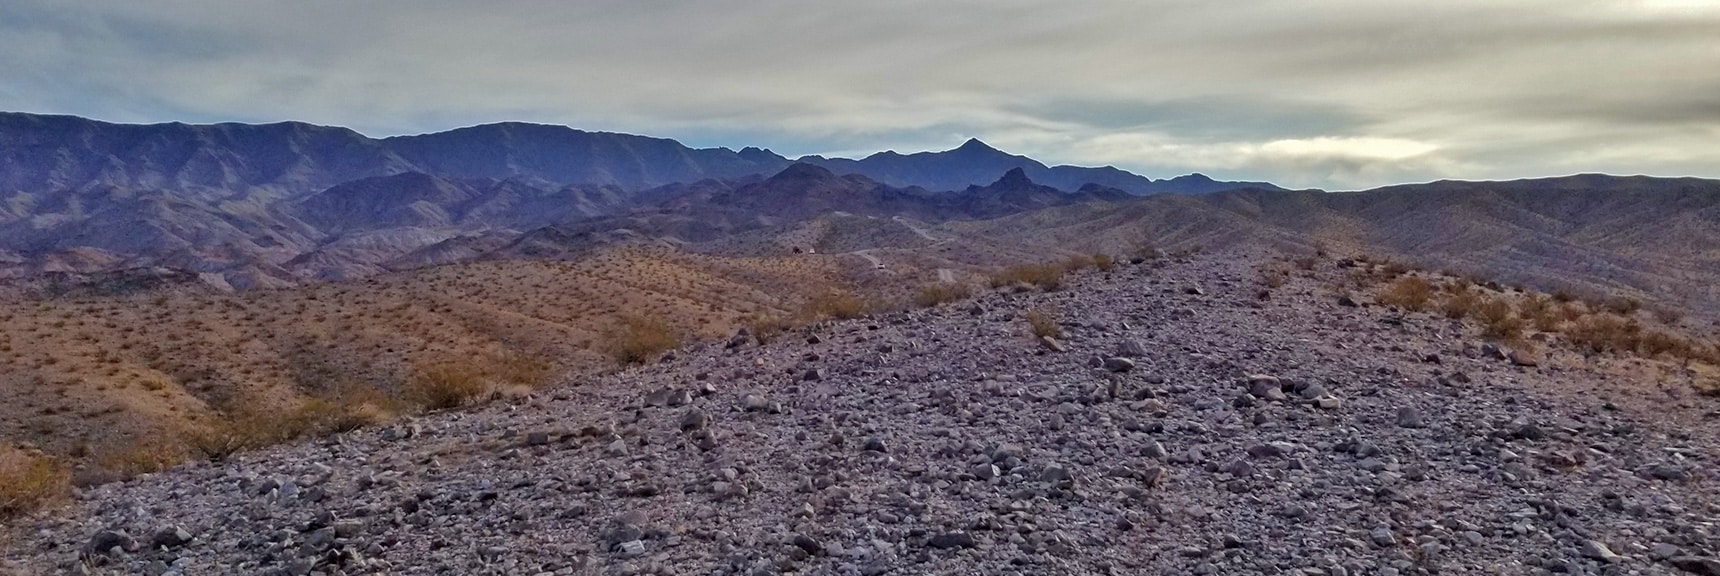 View Up North Mine Access Rd Toward Mt. Wilson | Fortification Hill | Lake Mead National Recreation Area, Arizona